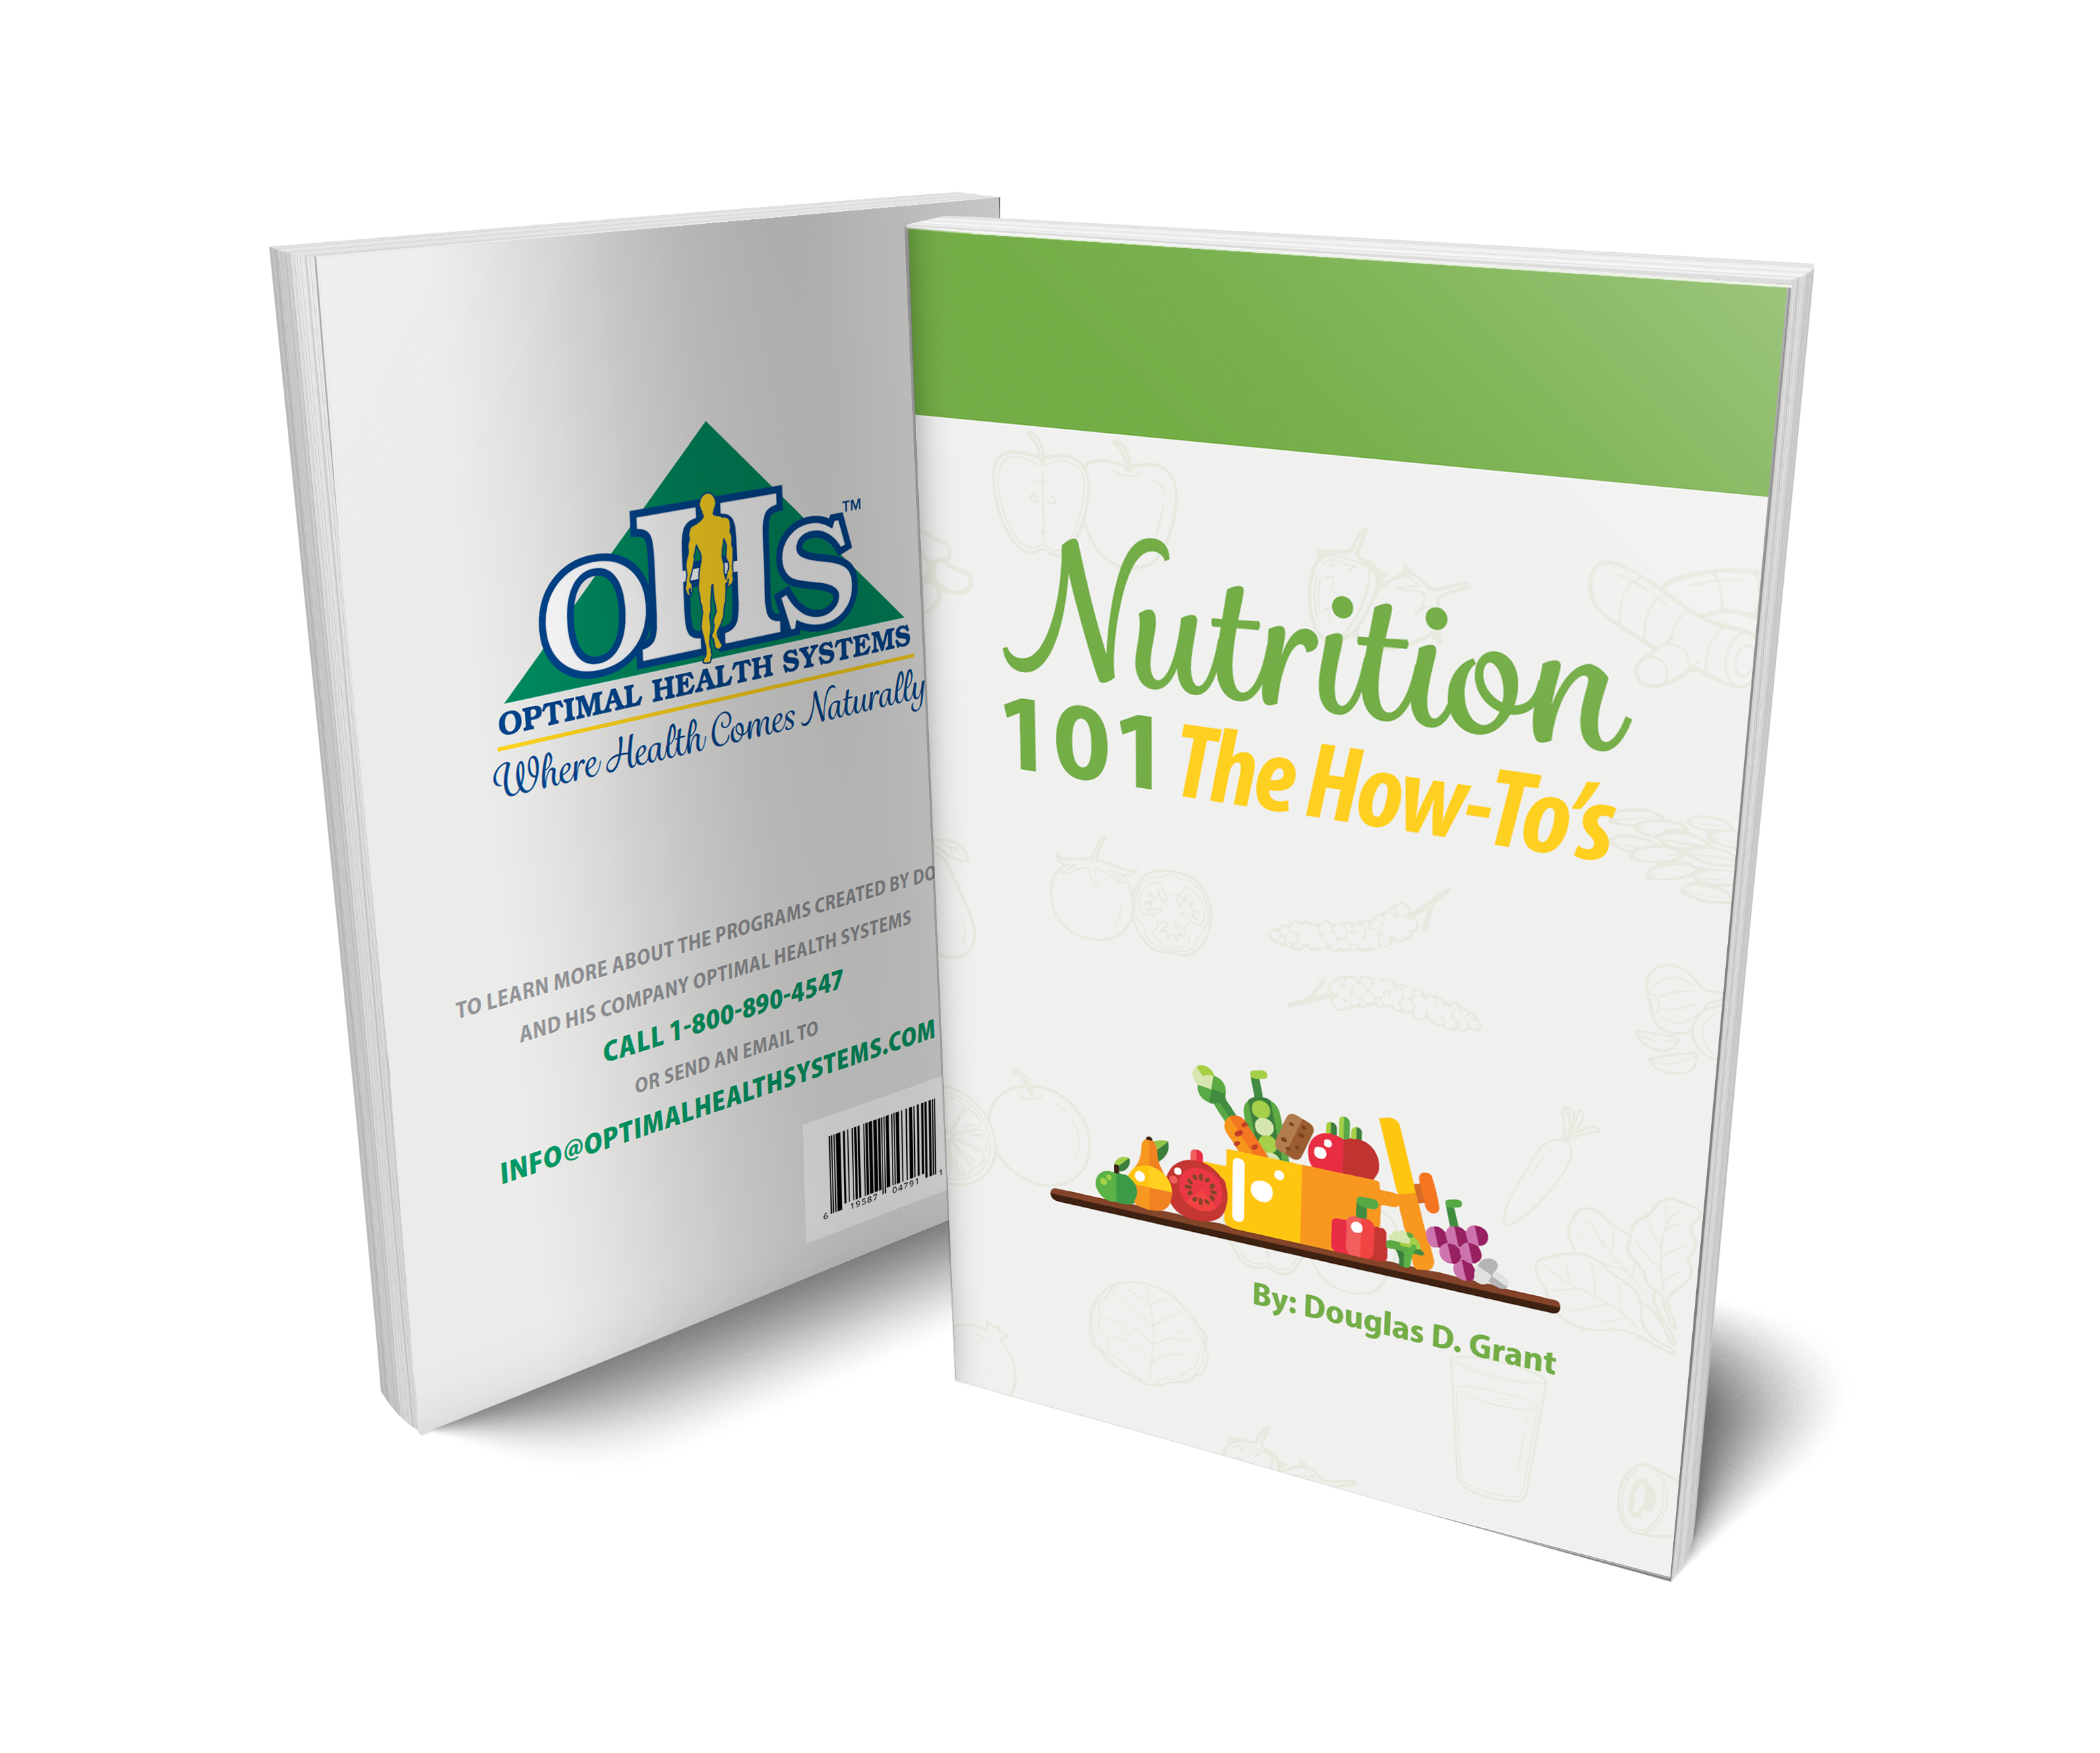 Image of the front and back covers of the Nutrition 101 the How-To's.